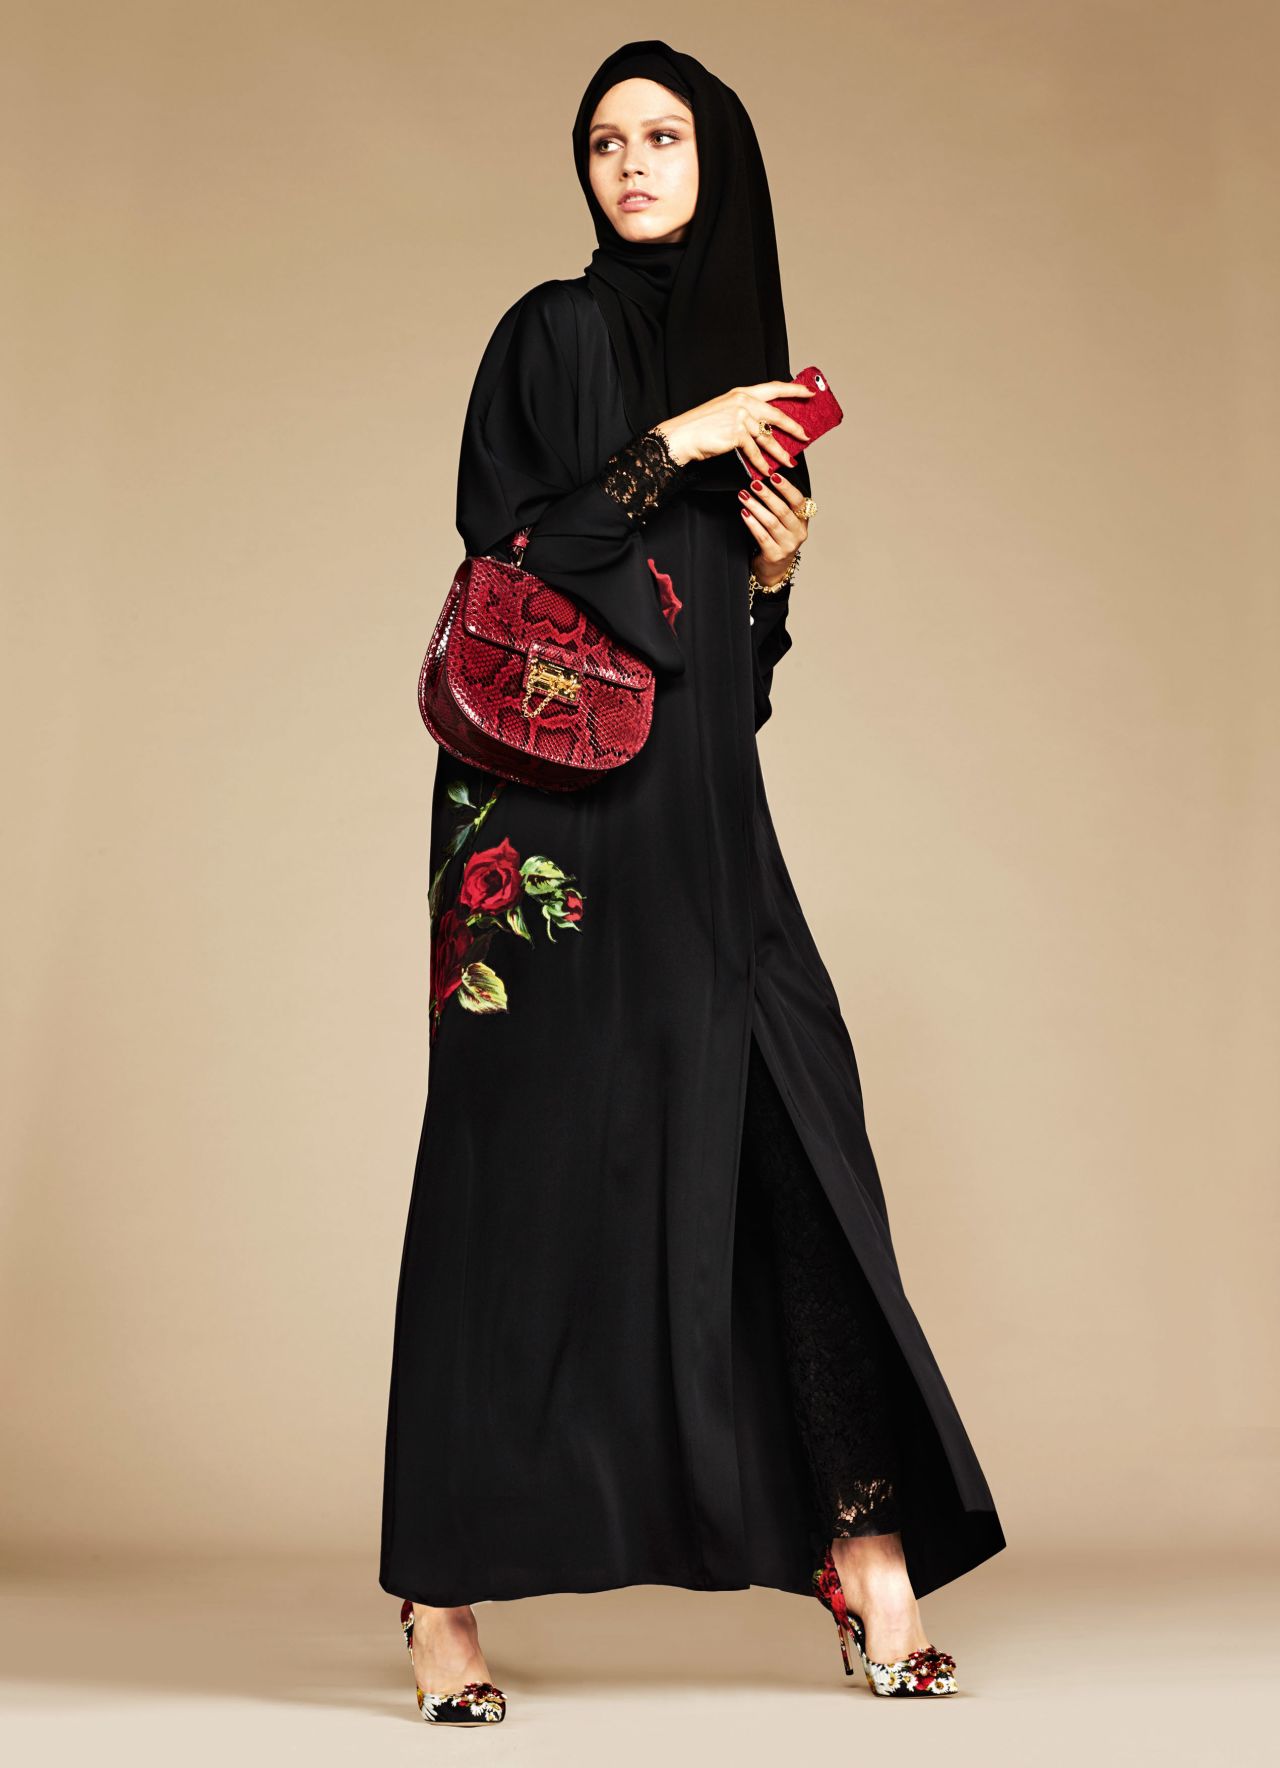 Dolce & Gabbana is one of many Western brands starting to target the lucrative Muslim fashion industry.